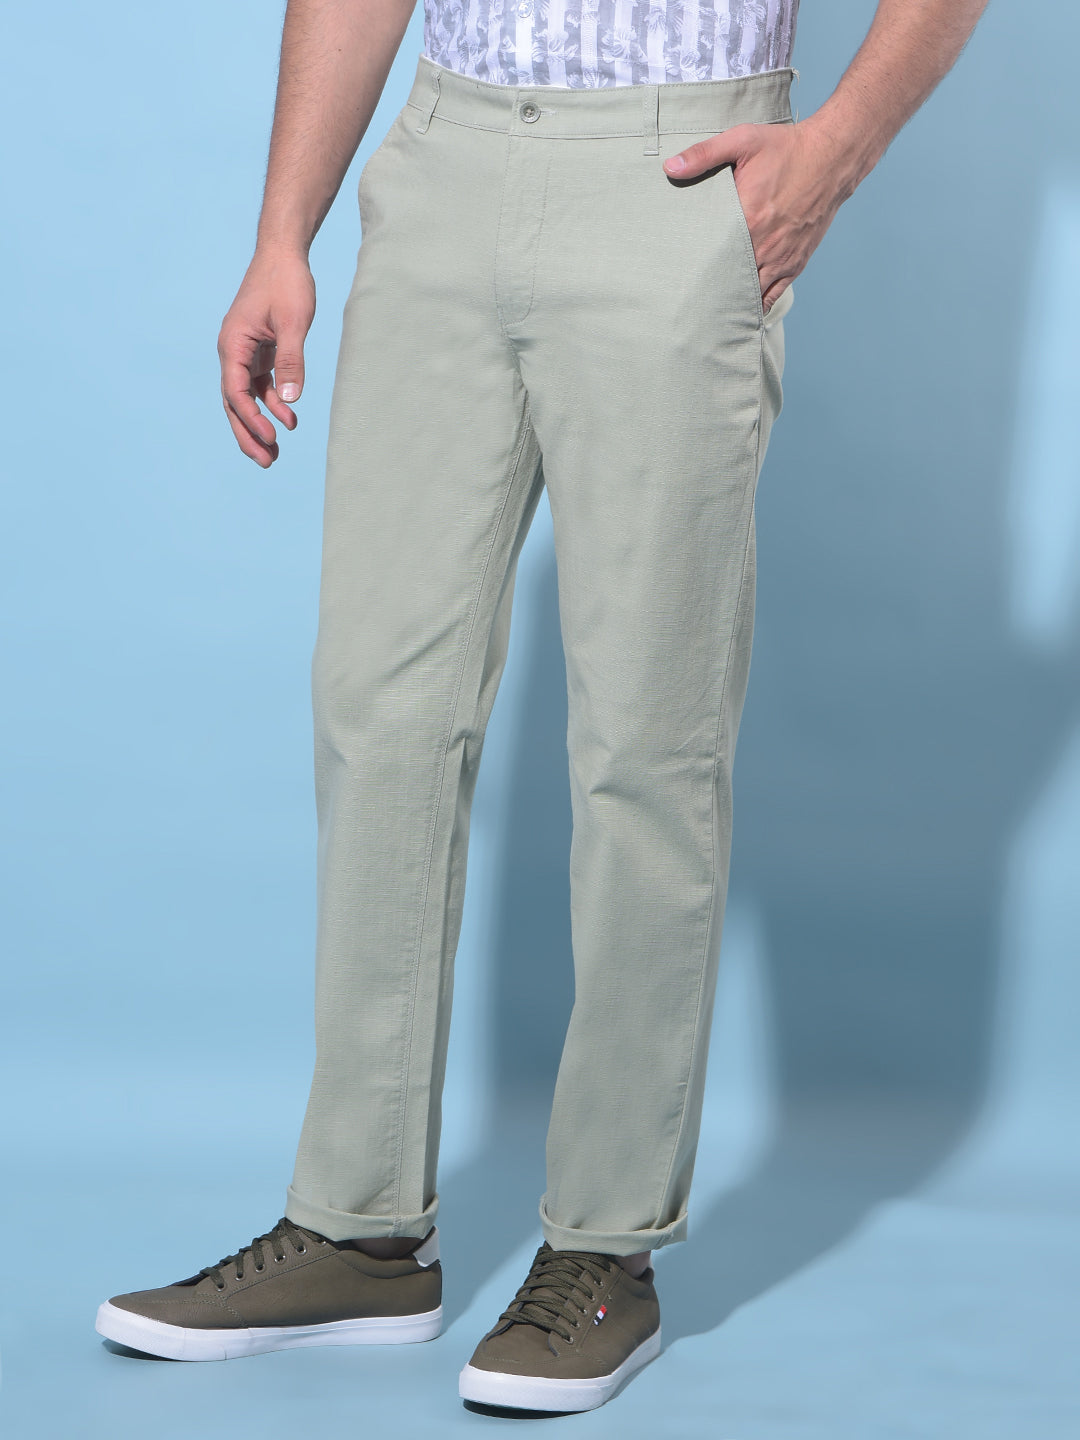 Green Straight Textured Printed Chinos Trousers-Men Trousers-Crimsoune Club